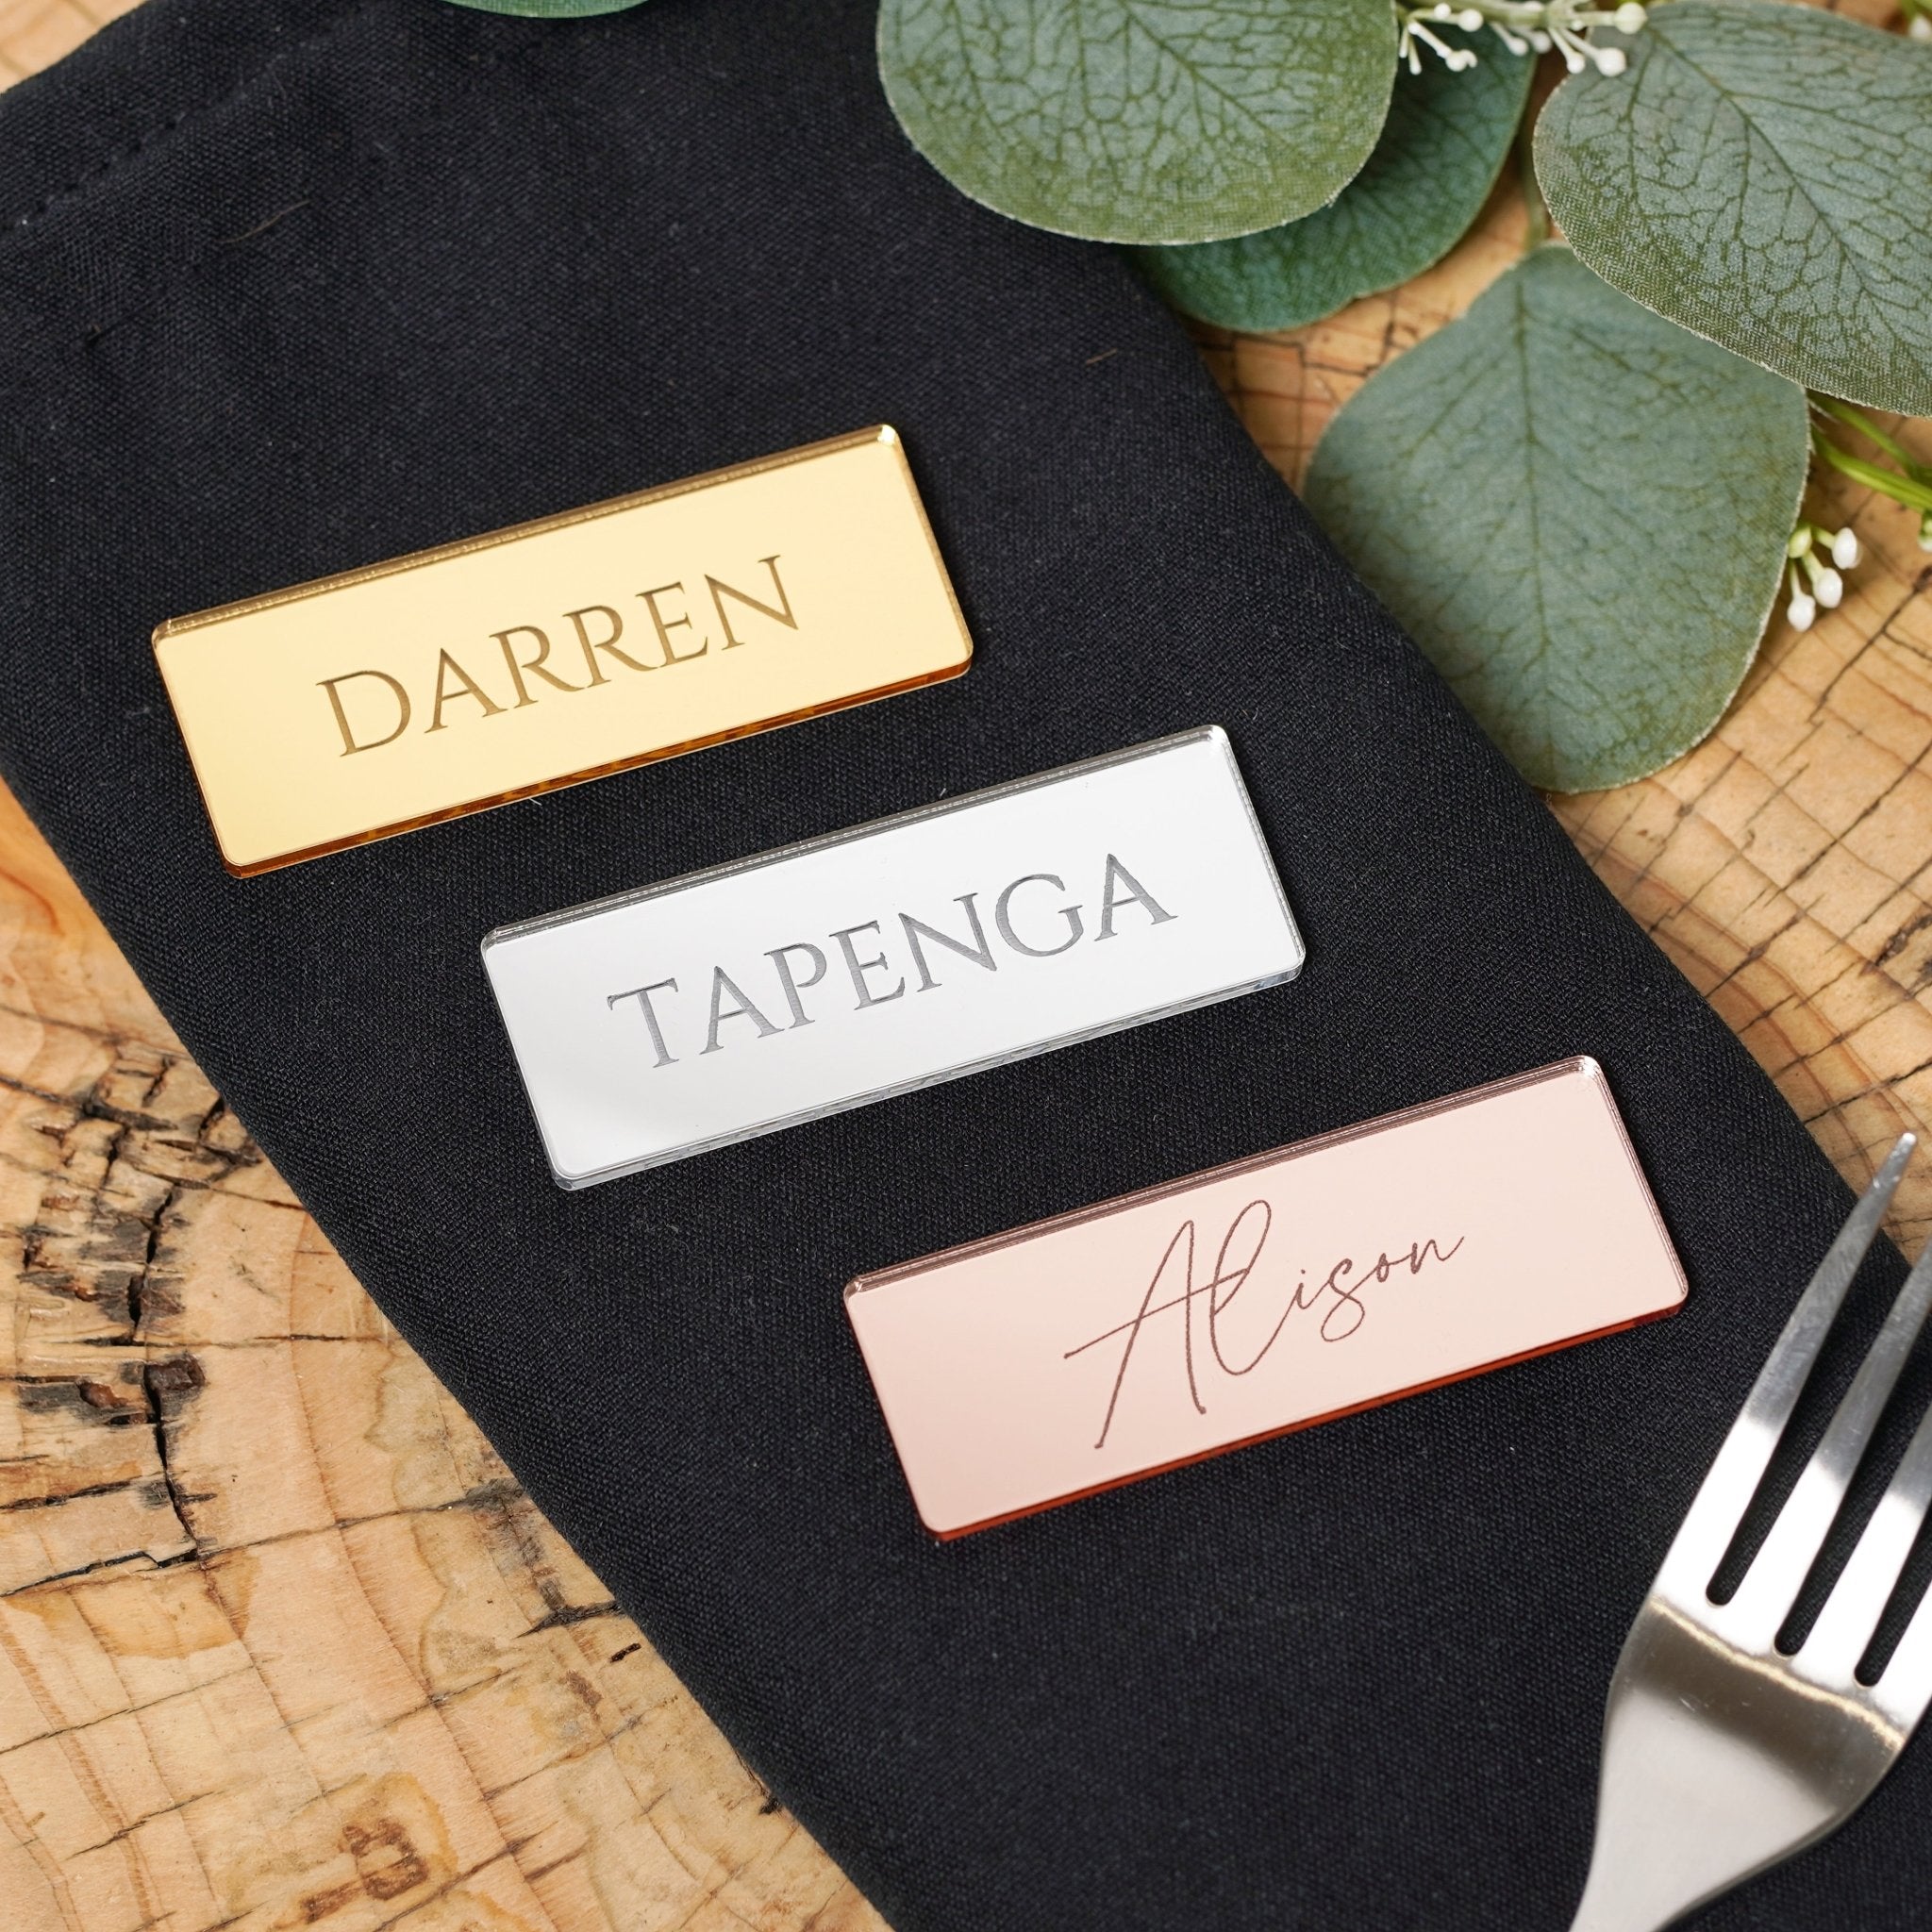 Place setting names tags